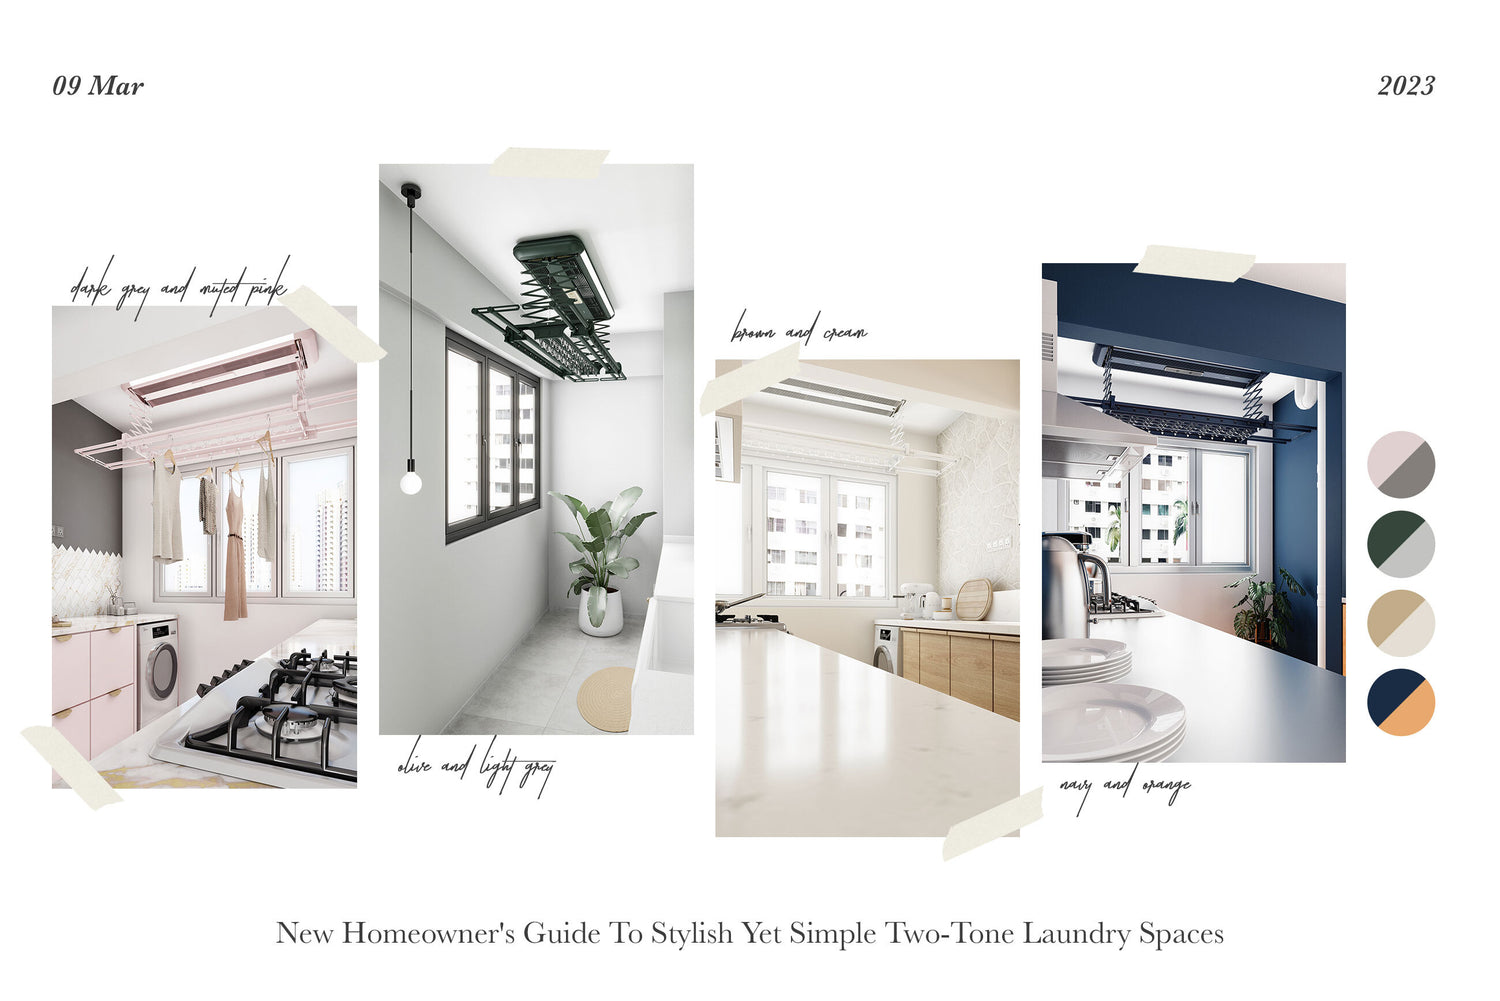 New Homeowner's Guide To Stylish Yet Simple Two-Tone Laundry Spaces